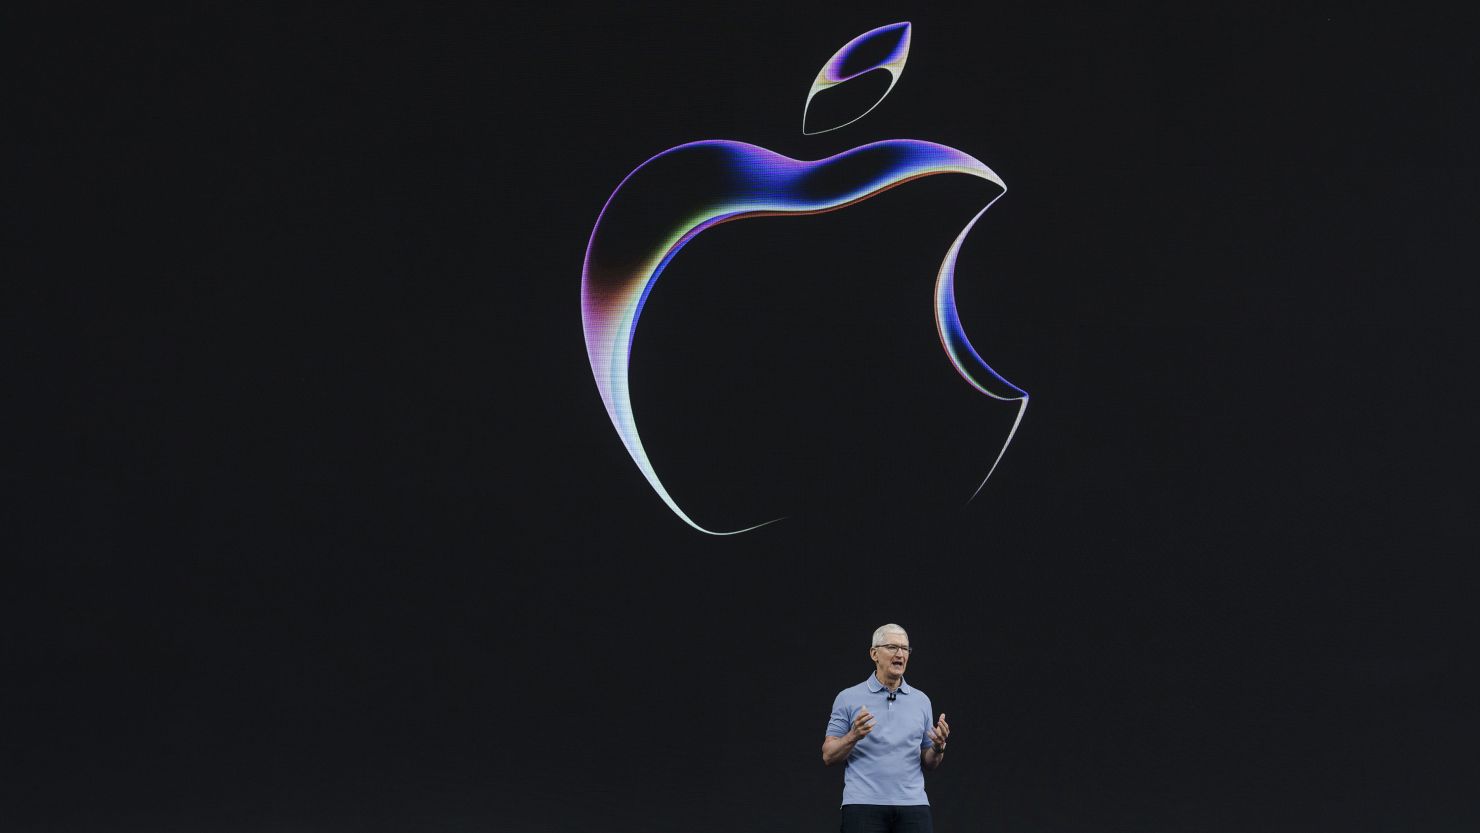 Tim Cook, chief executive officer of Apple Inc., during the Apple Worldwide Developers Conference at Apple Park campus in Cupertino, California, on Monday, June 5, 2023.